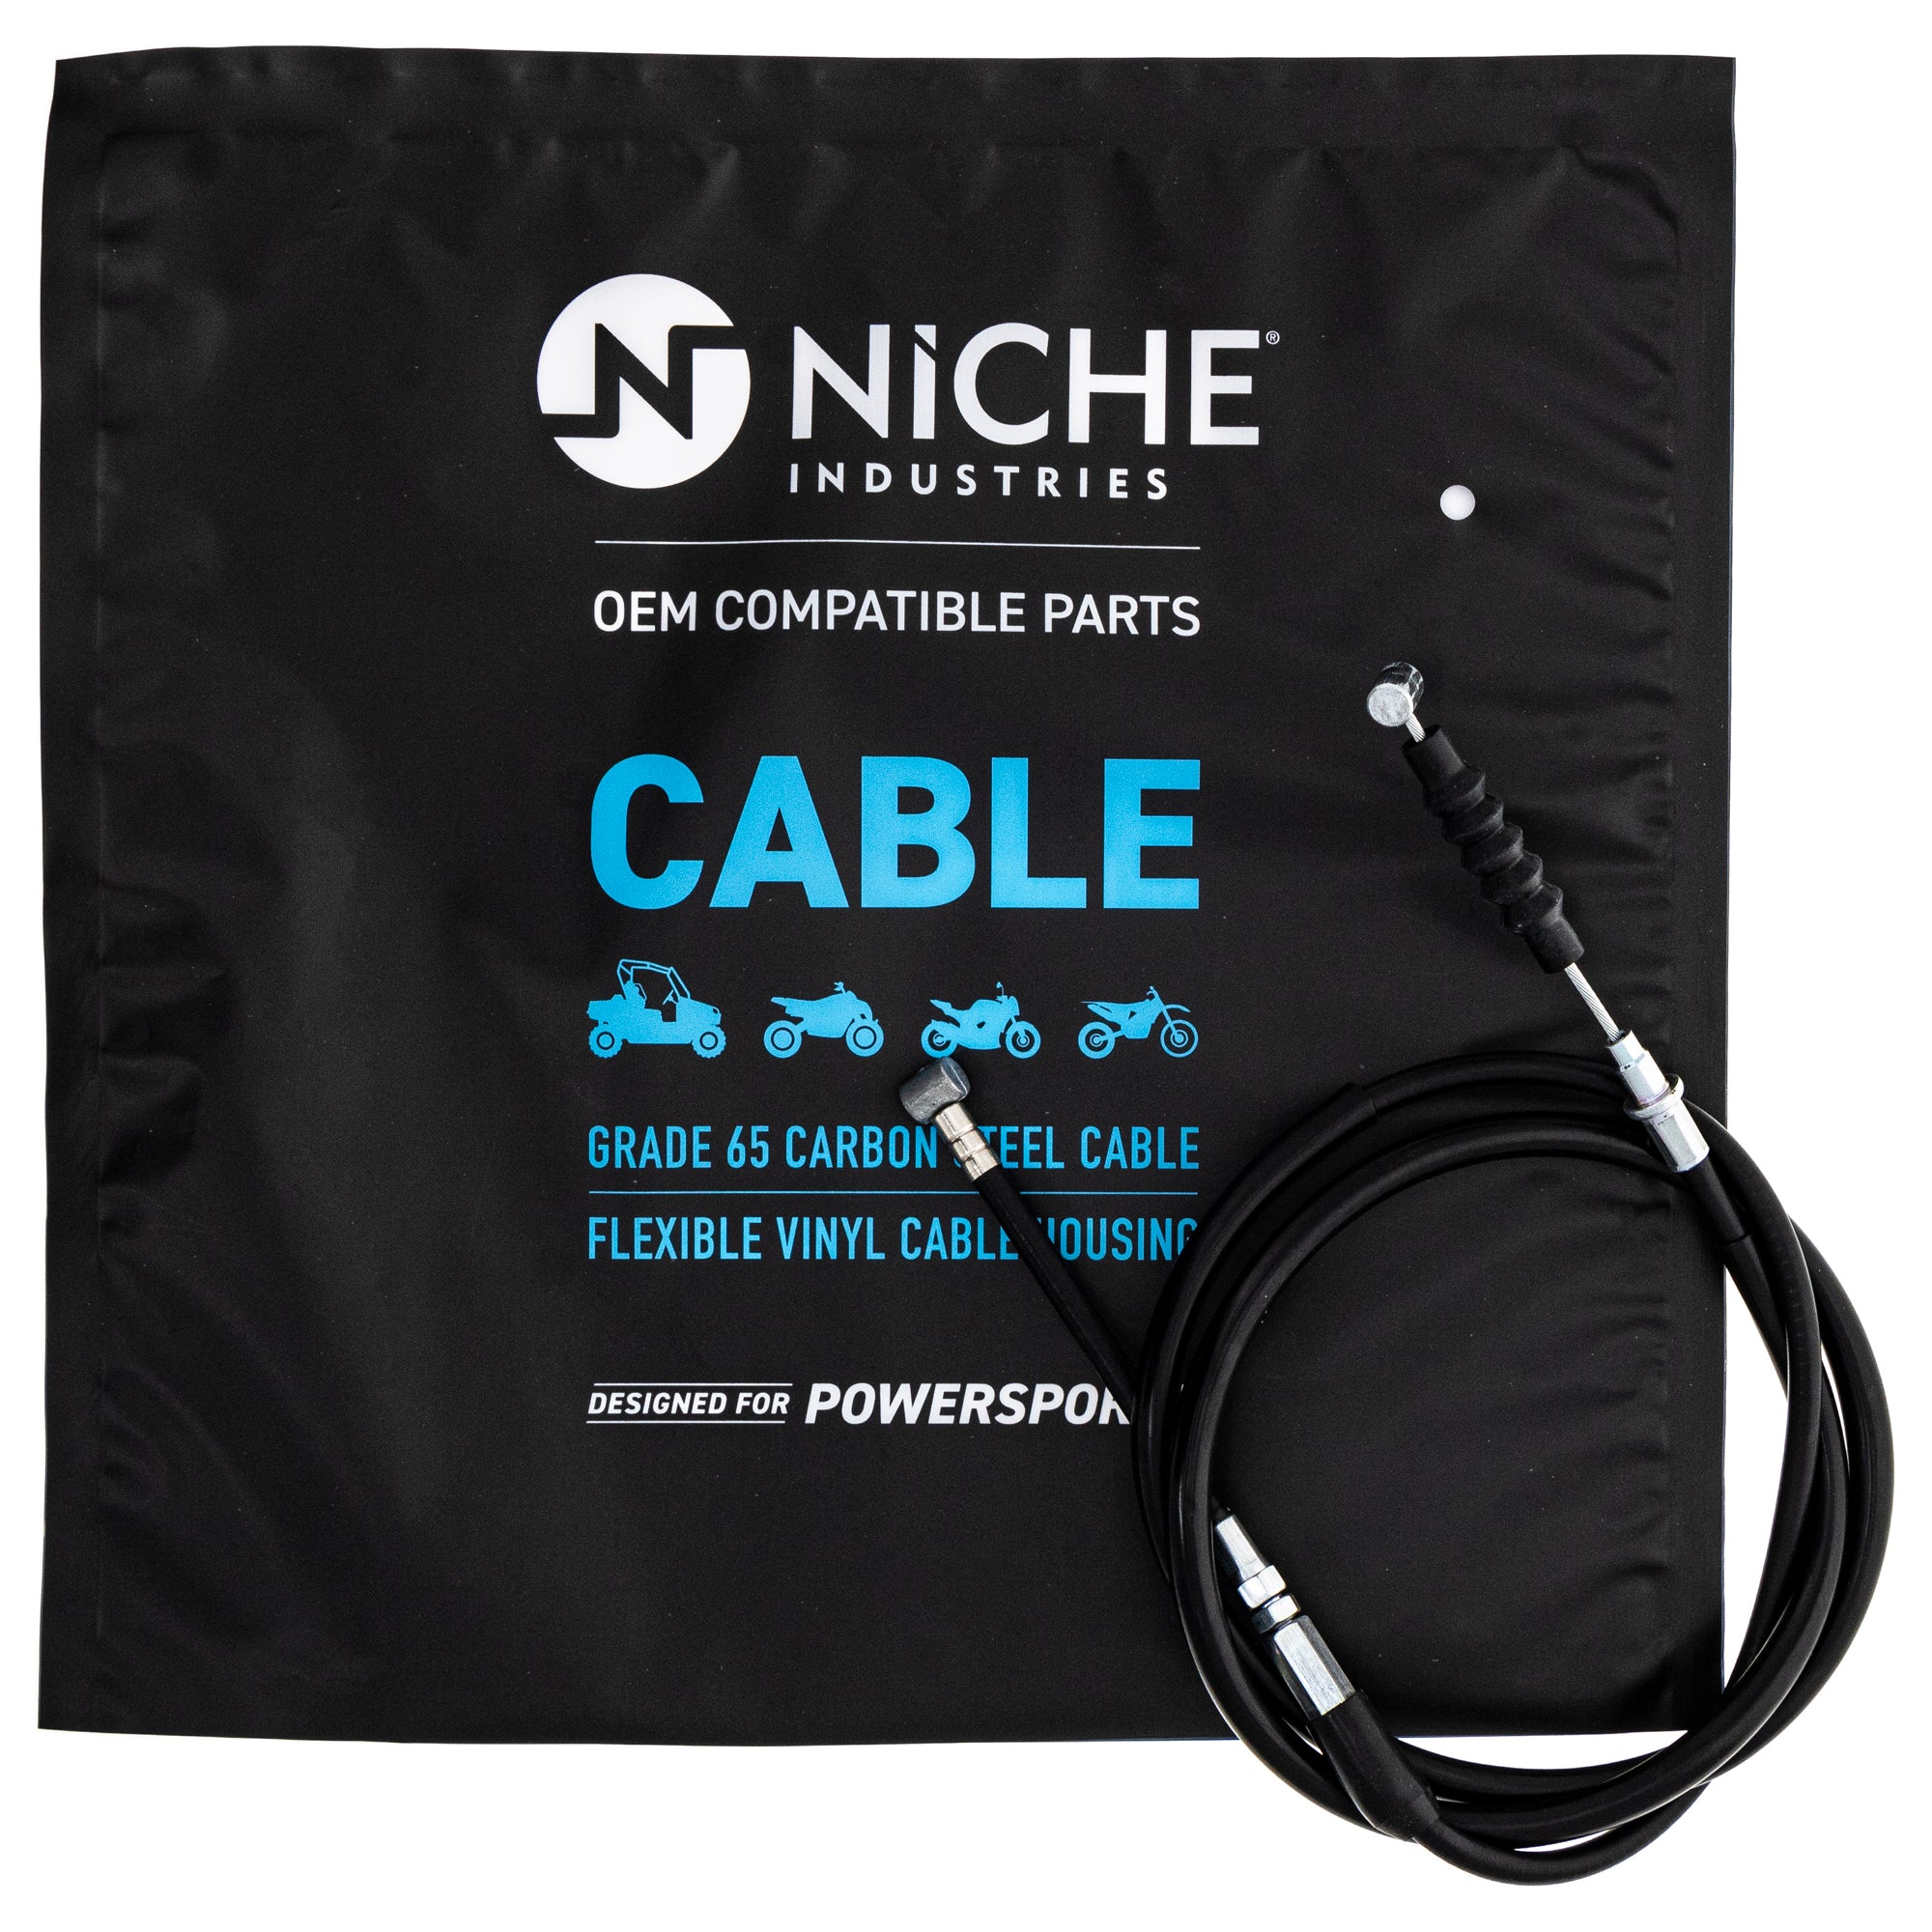 NICHE 519-CCB2490L Clutch Cable for zOTHER RMX250 RM250 RM125